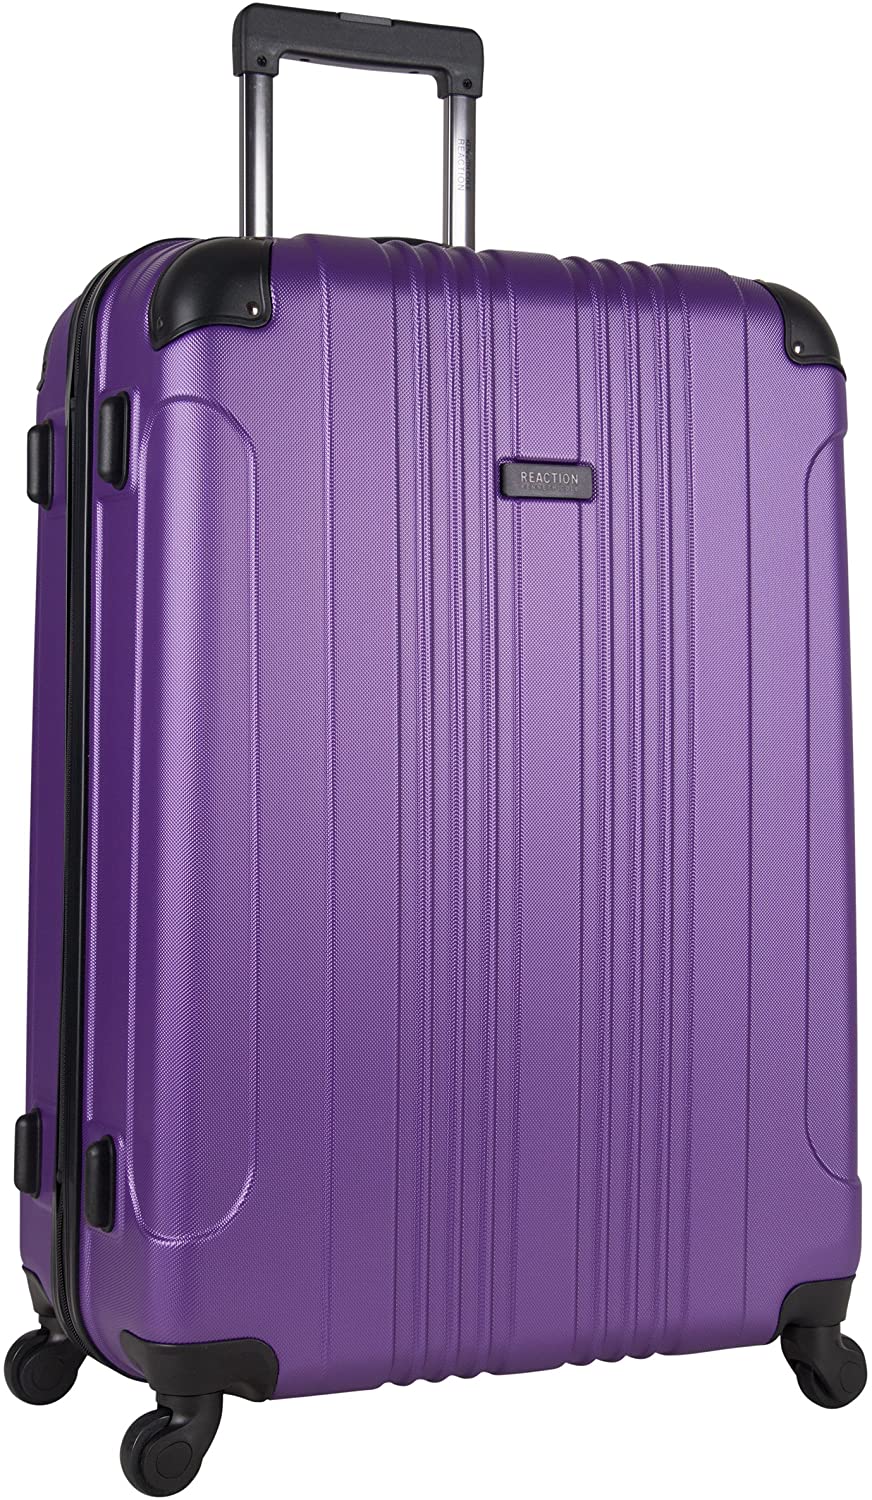 Kenneth Cole Reaction Out Of Bounds Lightweight Suitcase With Wheels, 28-Inch